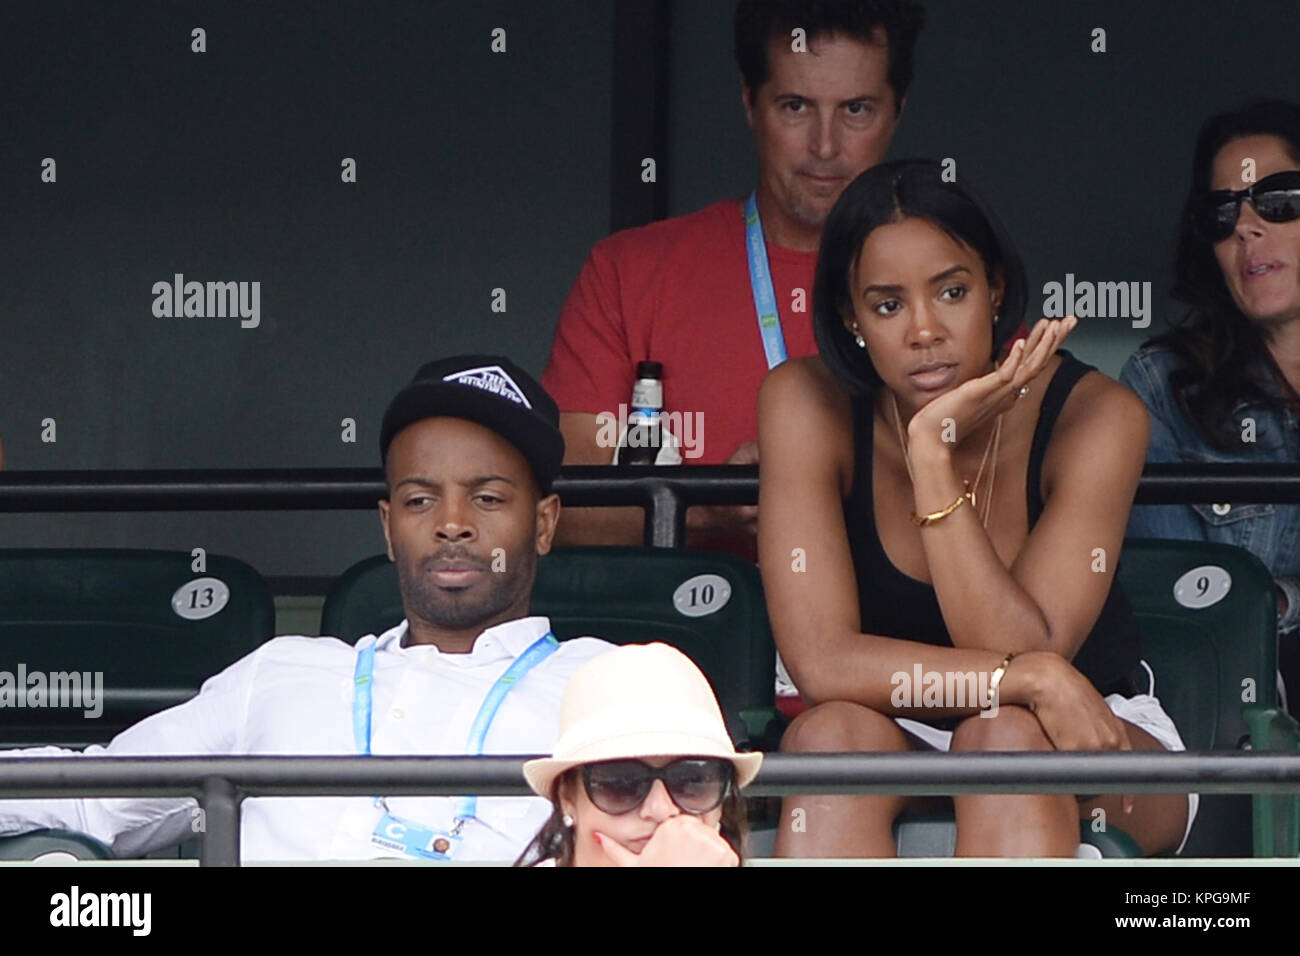 KEY BISCAYNE, FL - MARCH 22: Tim Witherspoon; Kelly Rowland during the Sony  Open day 6 at